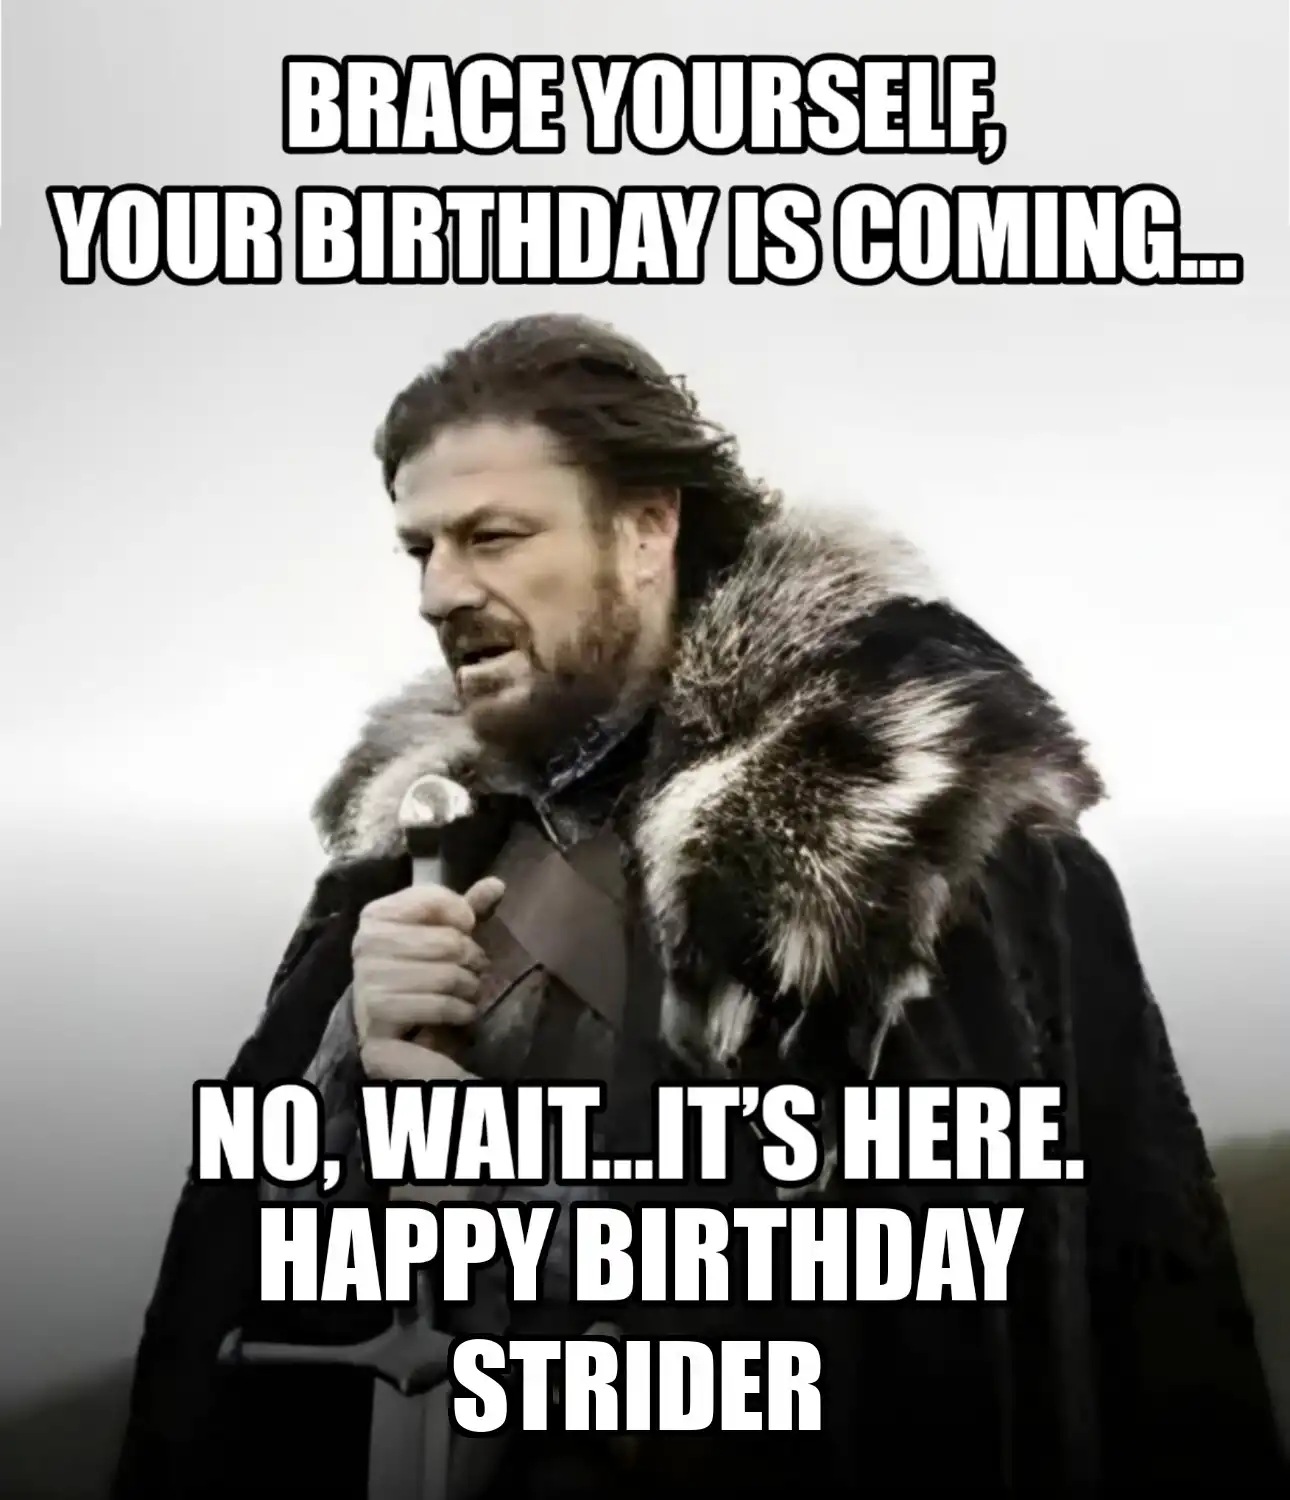 Happy Birthday Strider Brace Yourself Your Birthday Is Coming Meme